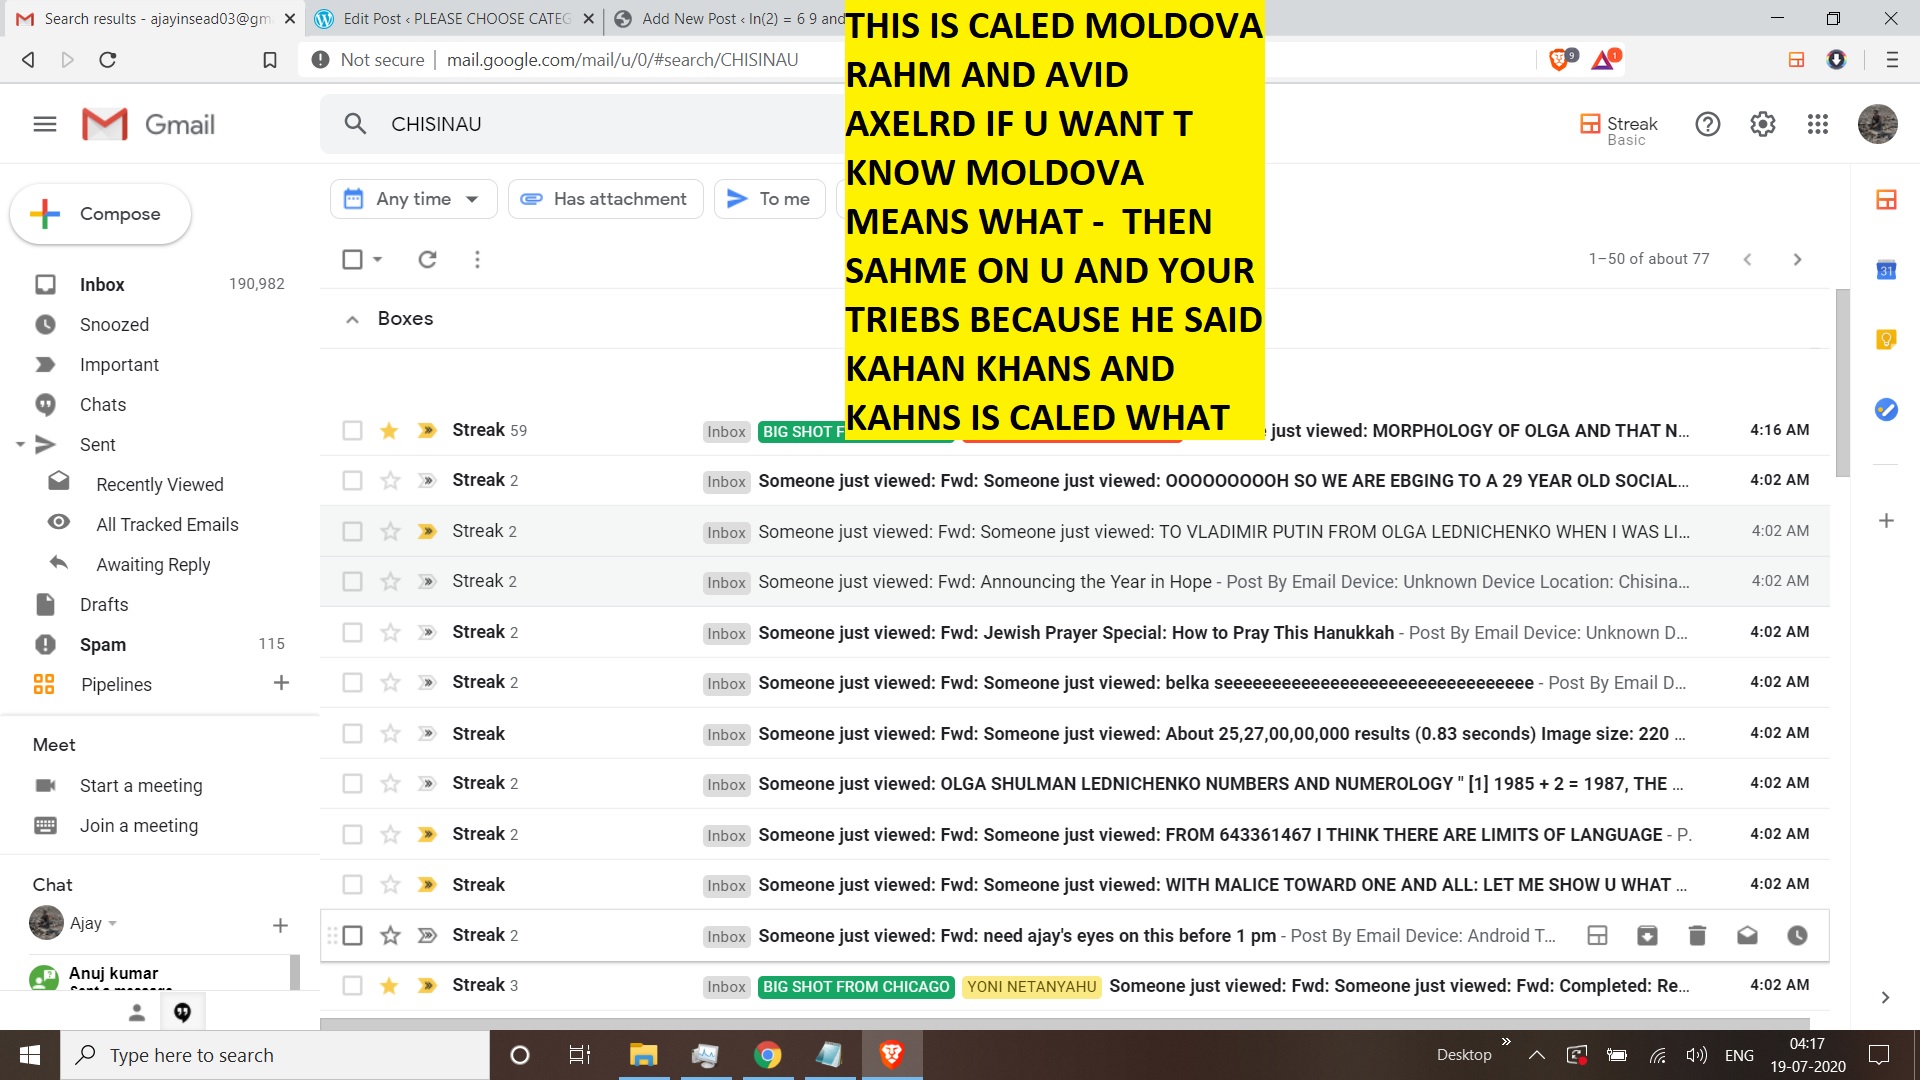 THIS IS CALED MOLDOVA RAHM AND AVID AXELRD IF U WANT T KNOW MOLDOVA MEANS WHAT - THEN SAHME ON U AND YOUR TRIEBS BECAUSE HE SAID KAHAN KHANS AND KAHNS IS CALED WHAT